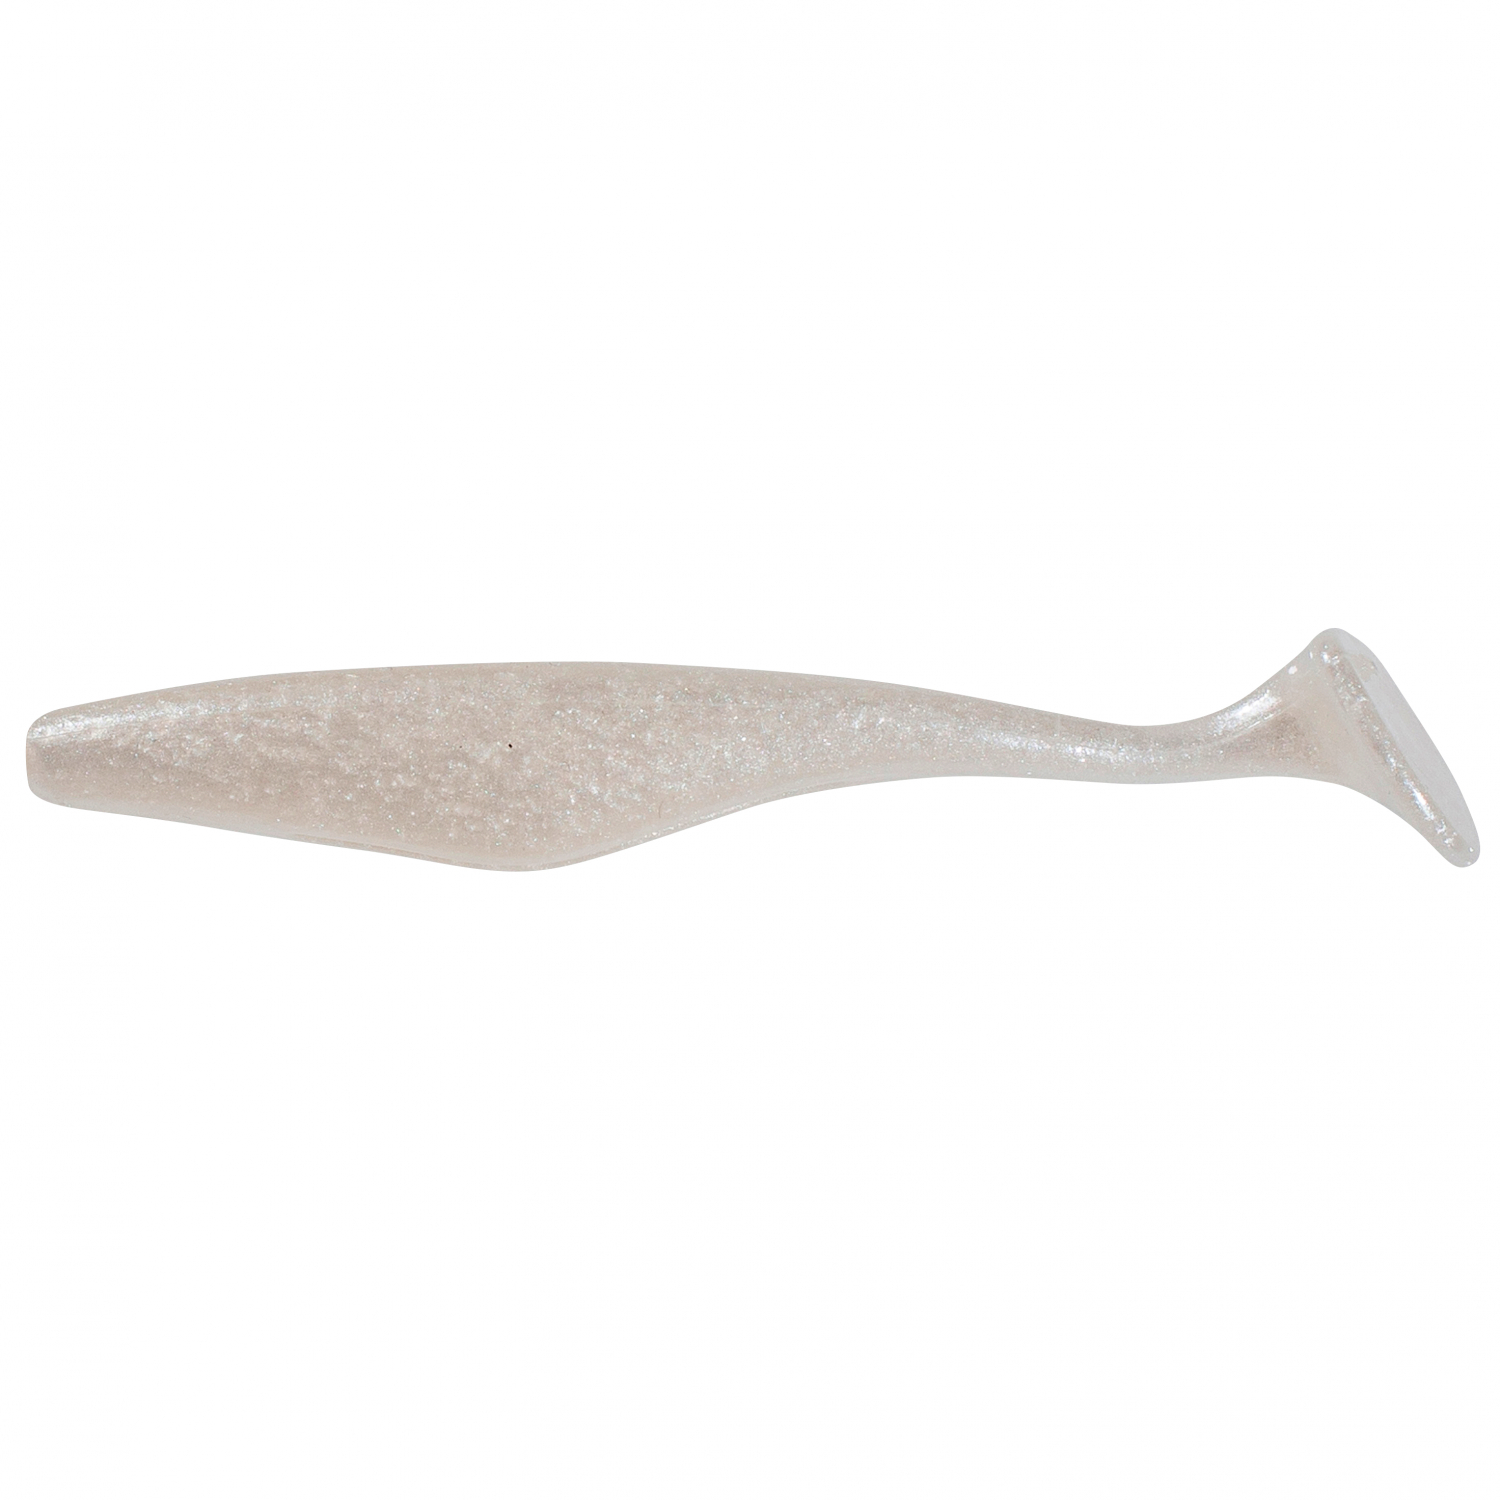 ShadXperts Rubber Fish Floating Jerk Minnow 4" (Pearl) 